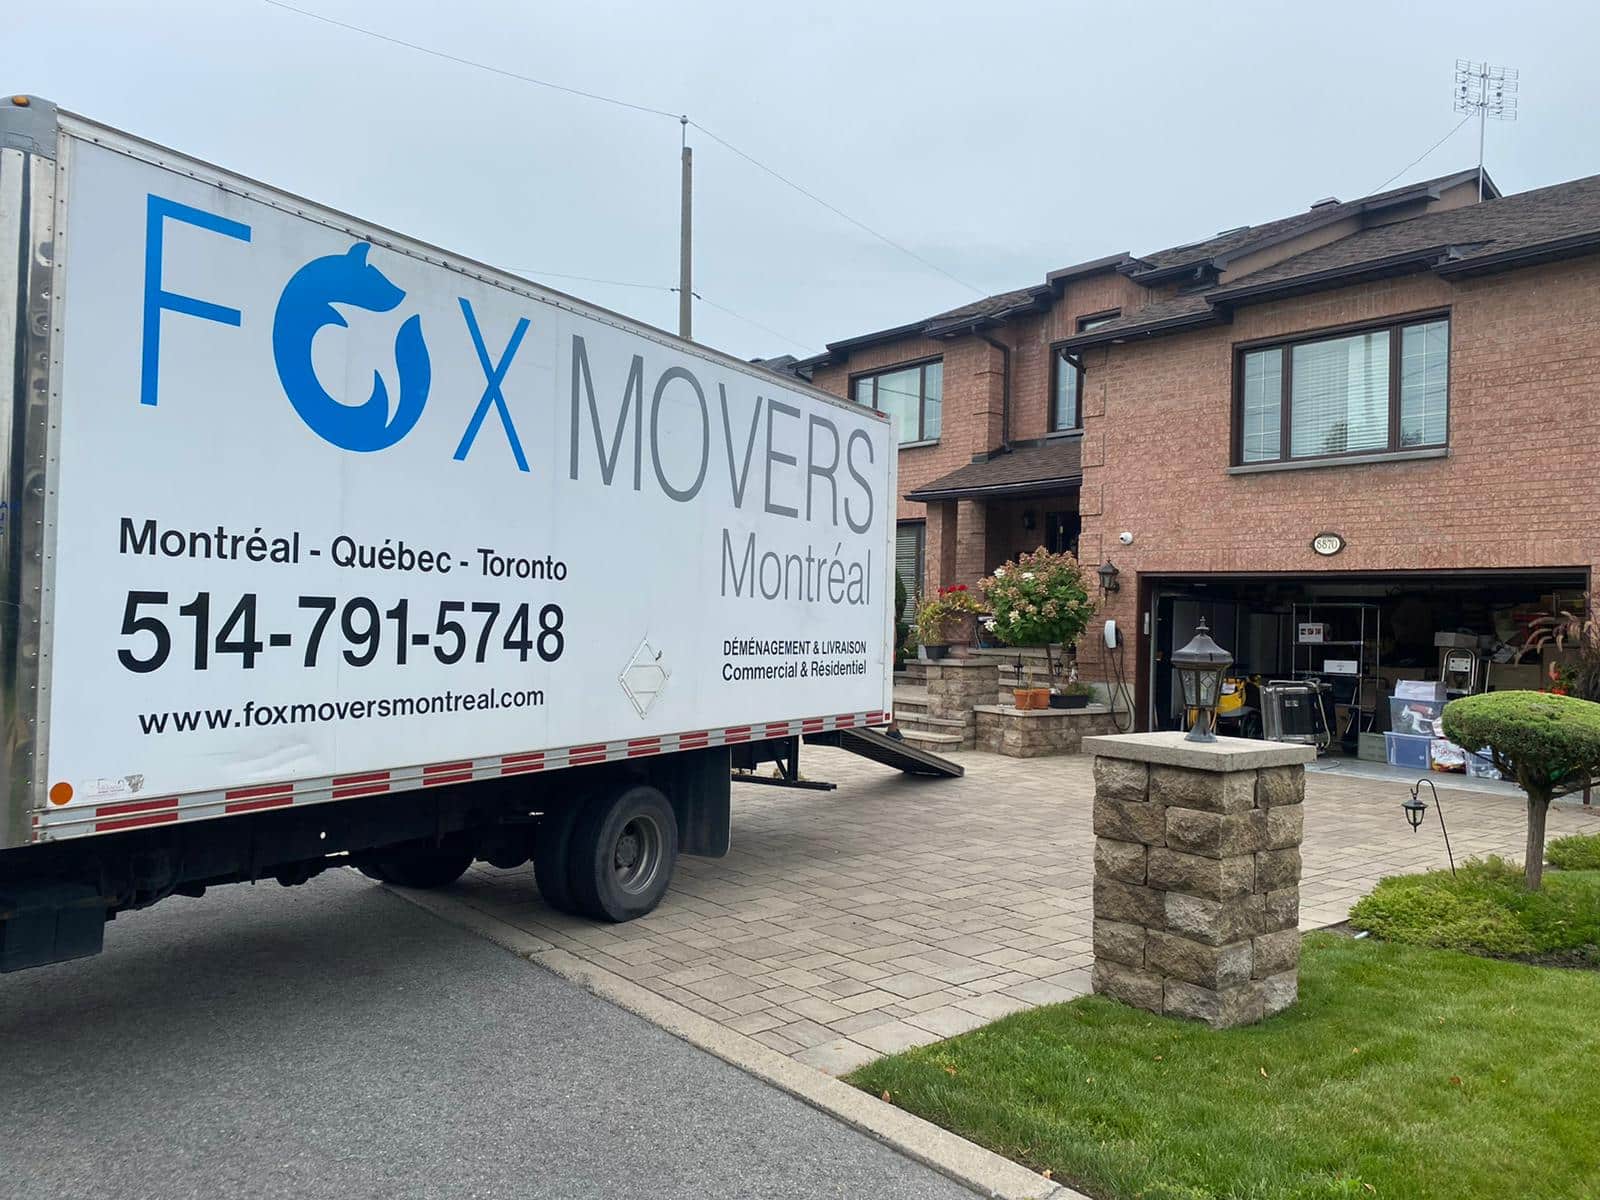 Reliable Long Distance Moving Services in Montreal - Fox Movers Montreal